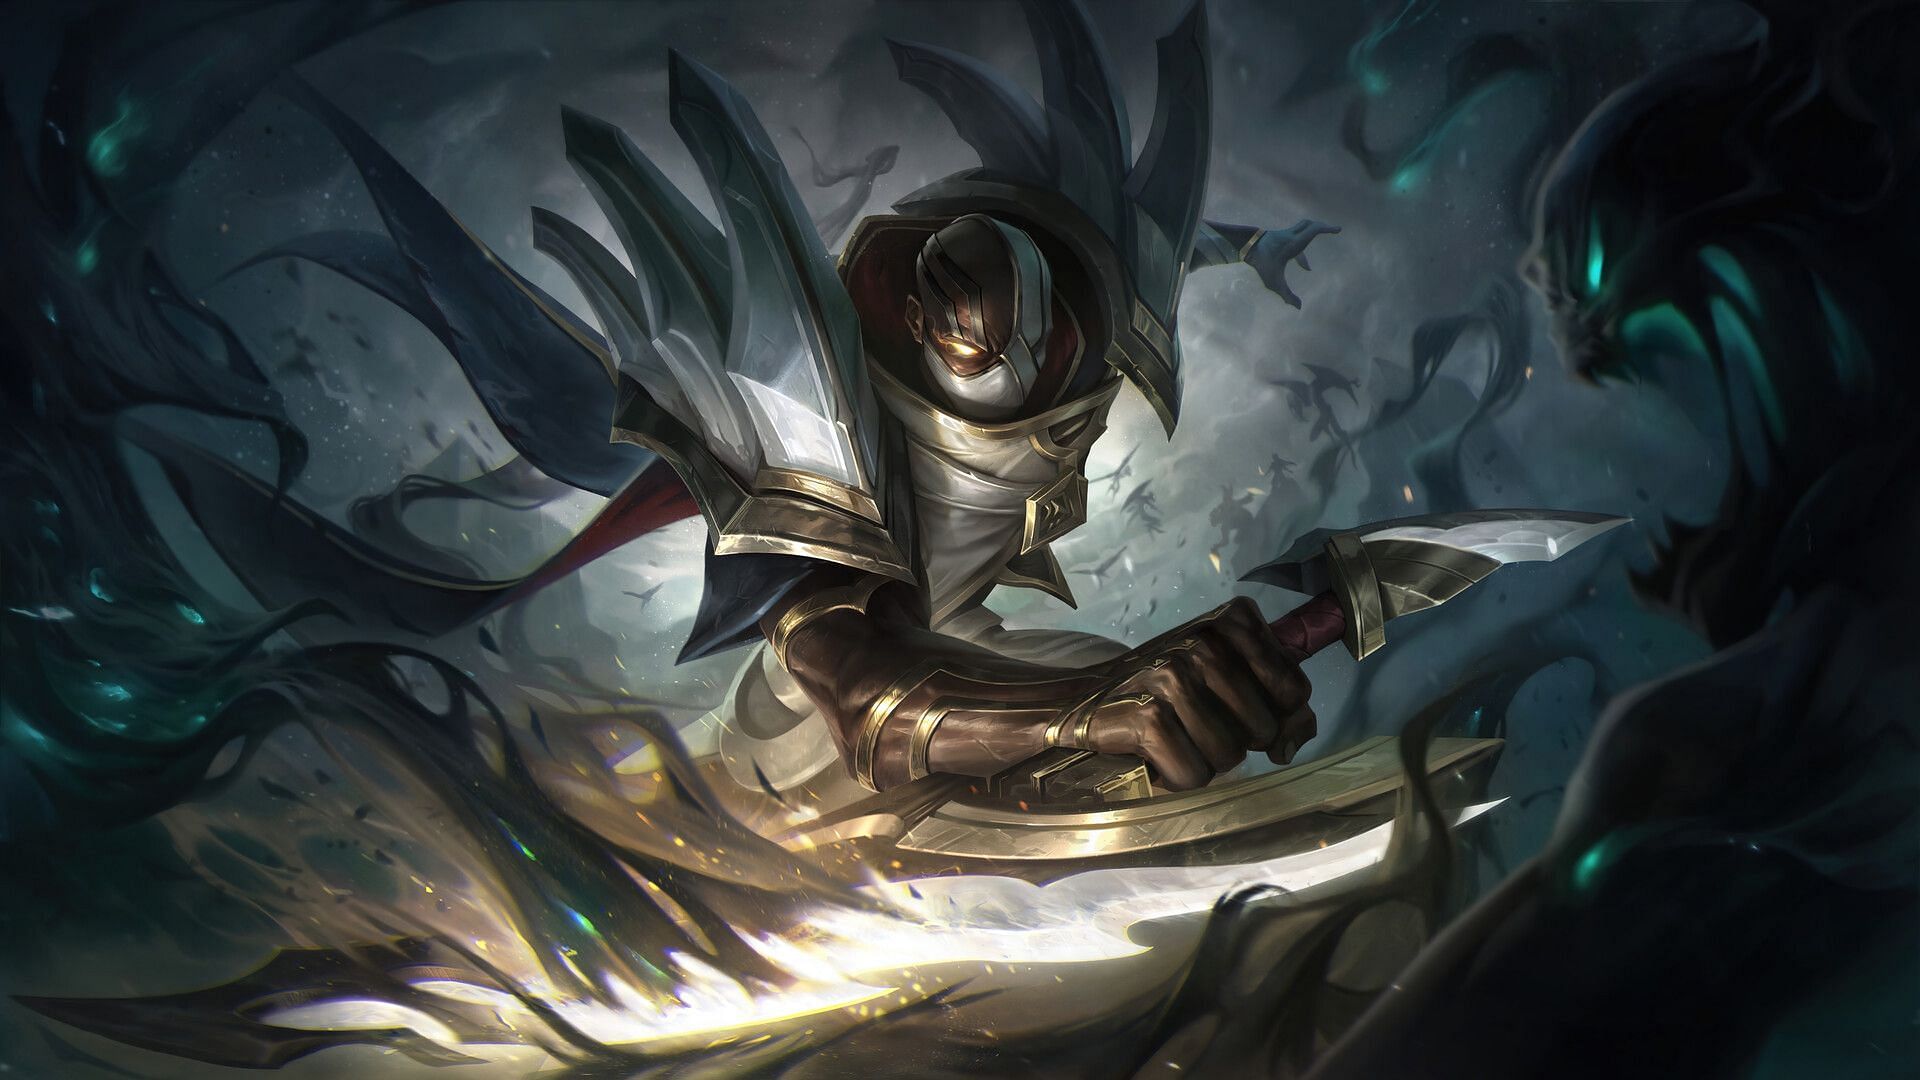 Pyke was destroyed by the even despite having one of the best back stories in League of Legends (Image via League of Legends)